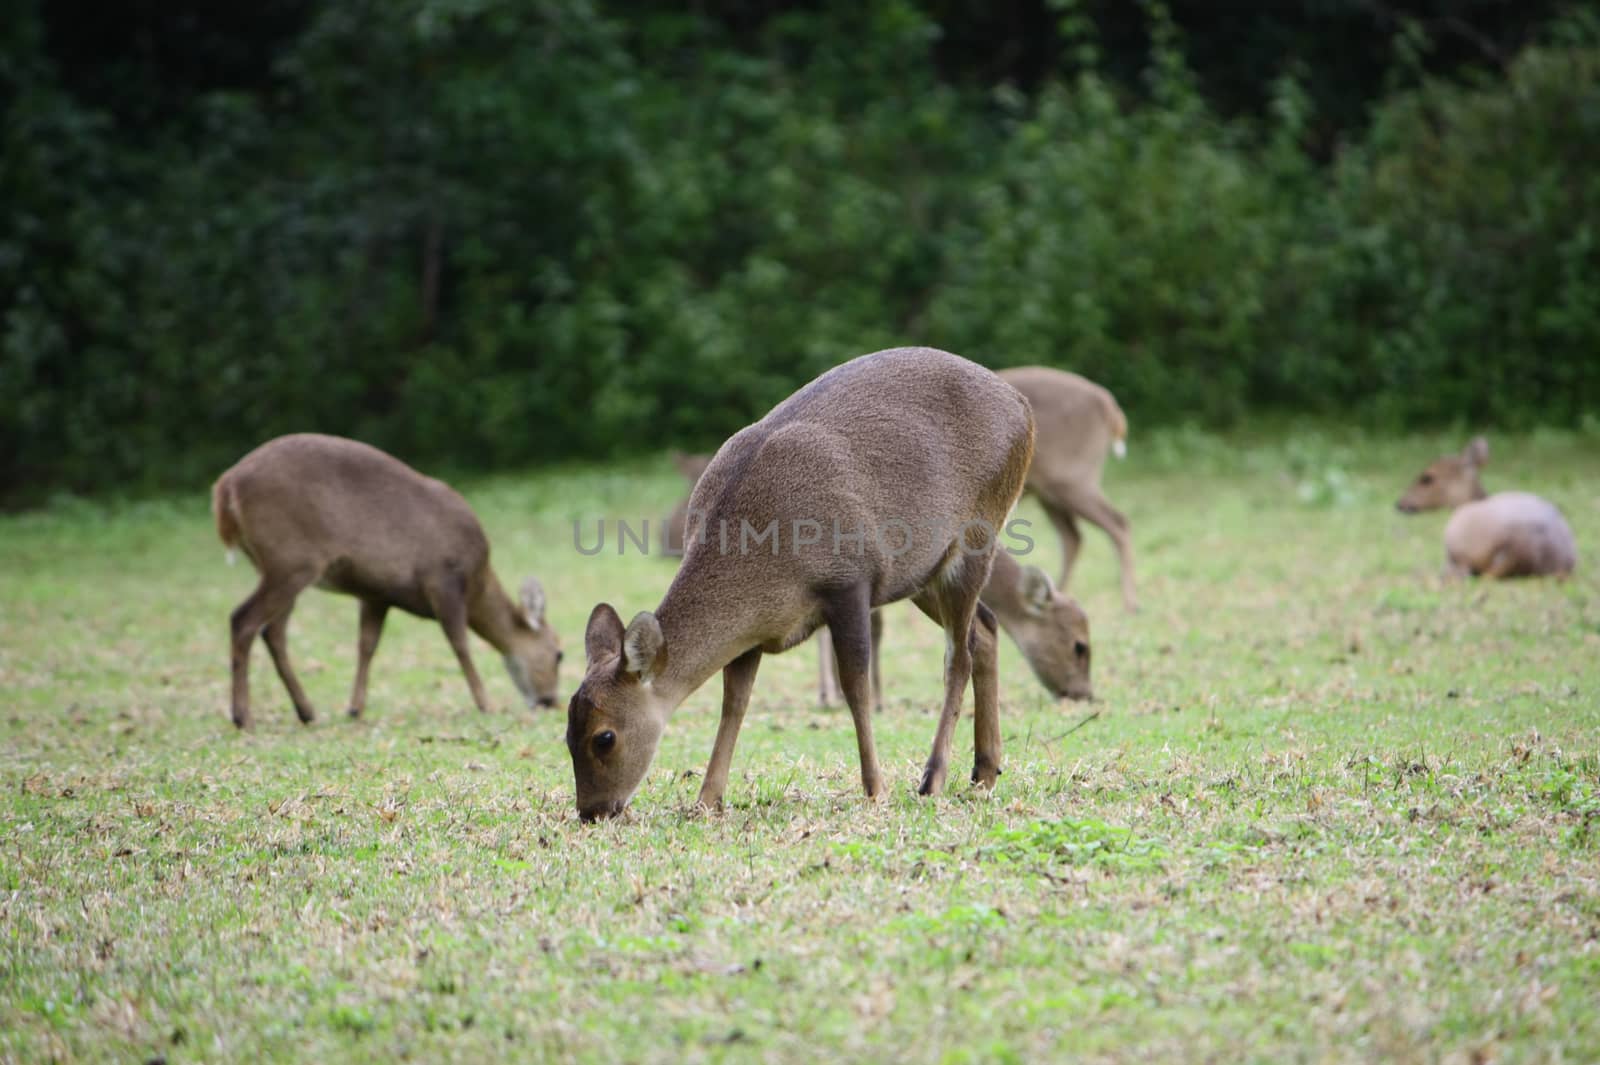 deer eating grasses in the nature by arraymax